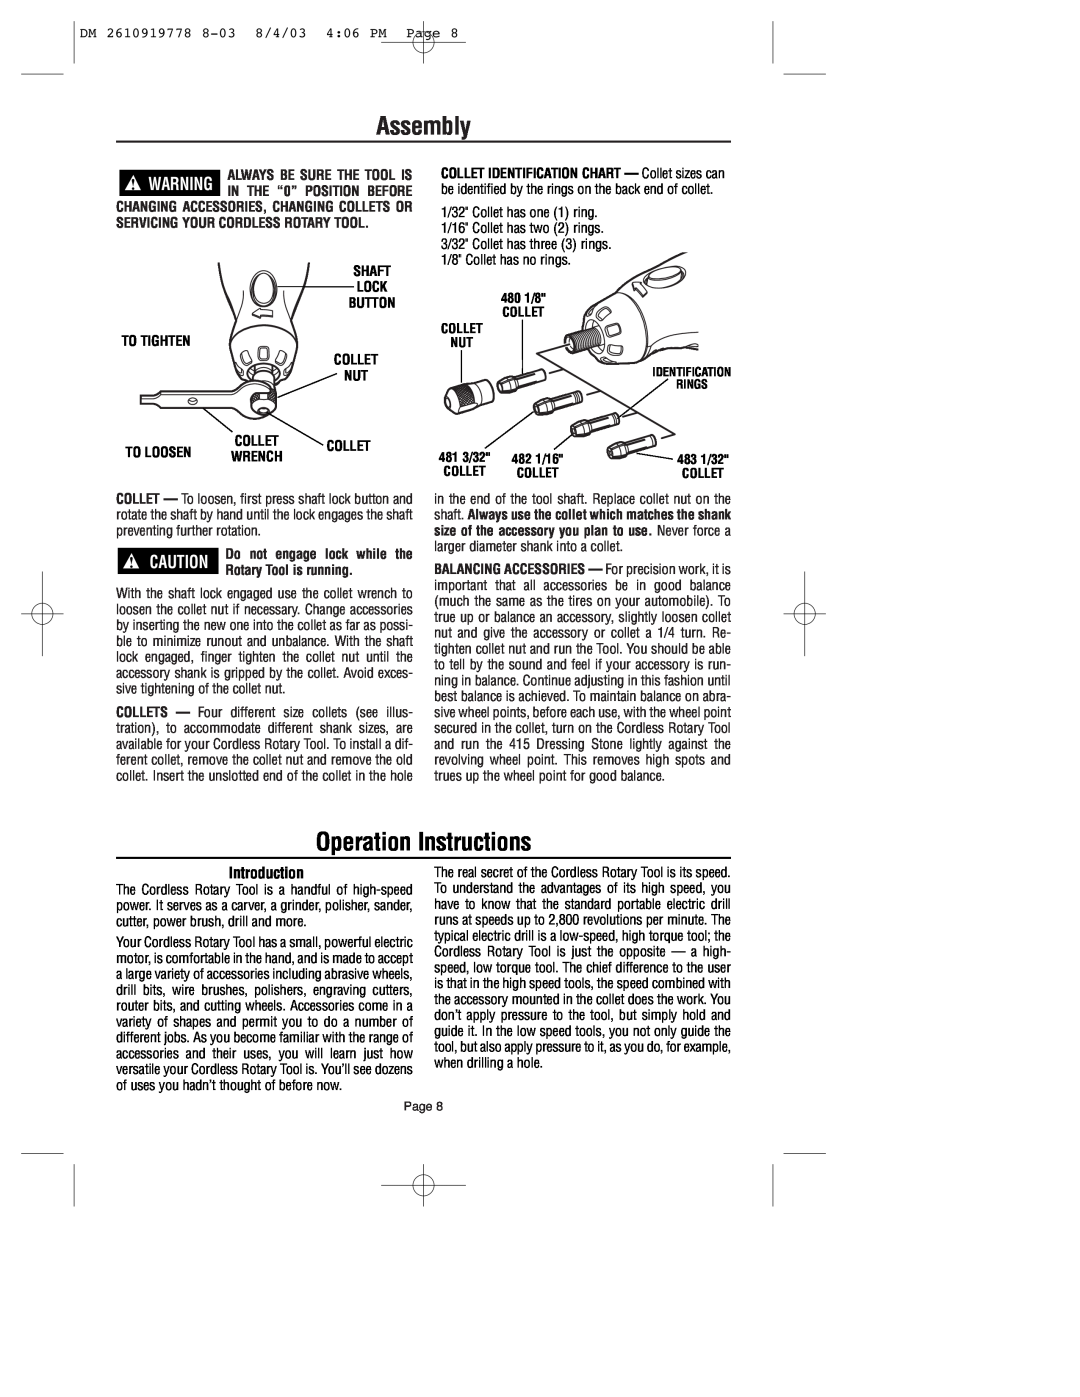 Dremel 800 owner manual Assembly, Operation Instructions, Introduction, DM 2610919778 8-038/4/03 4 06 PM Page 